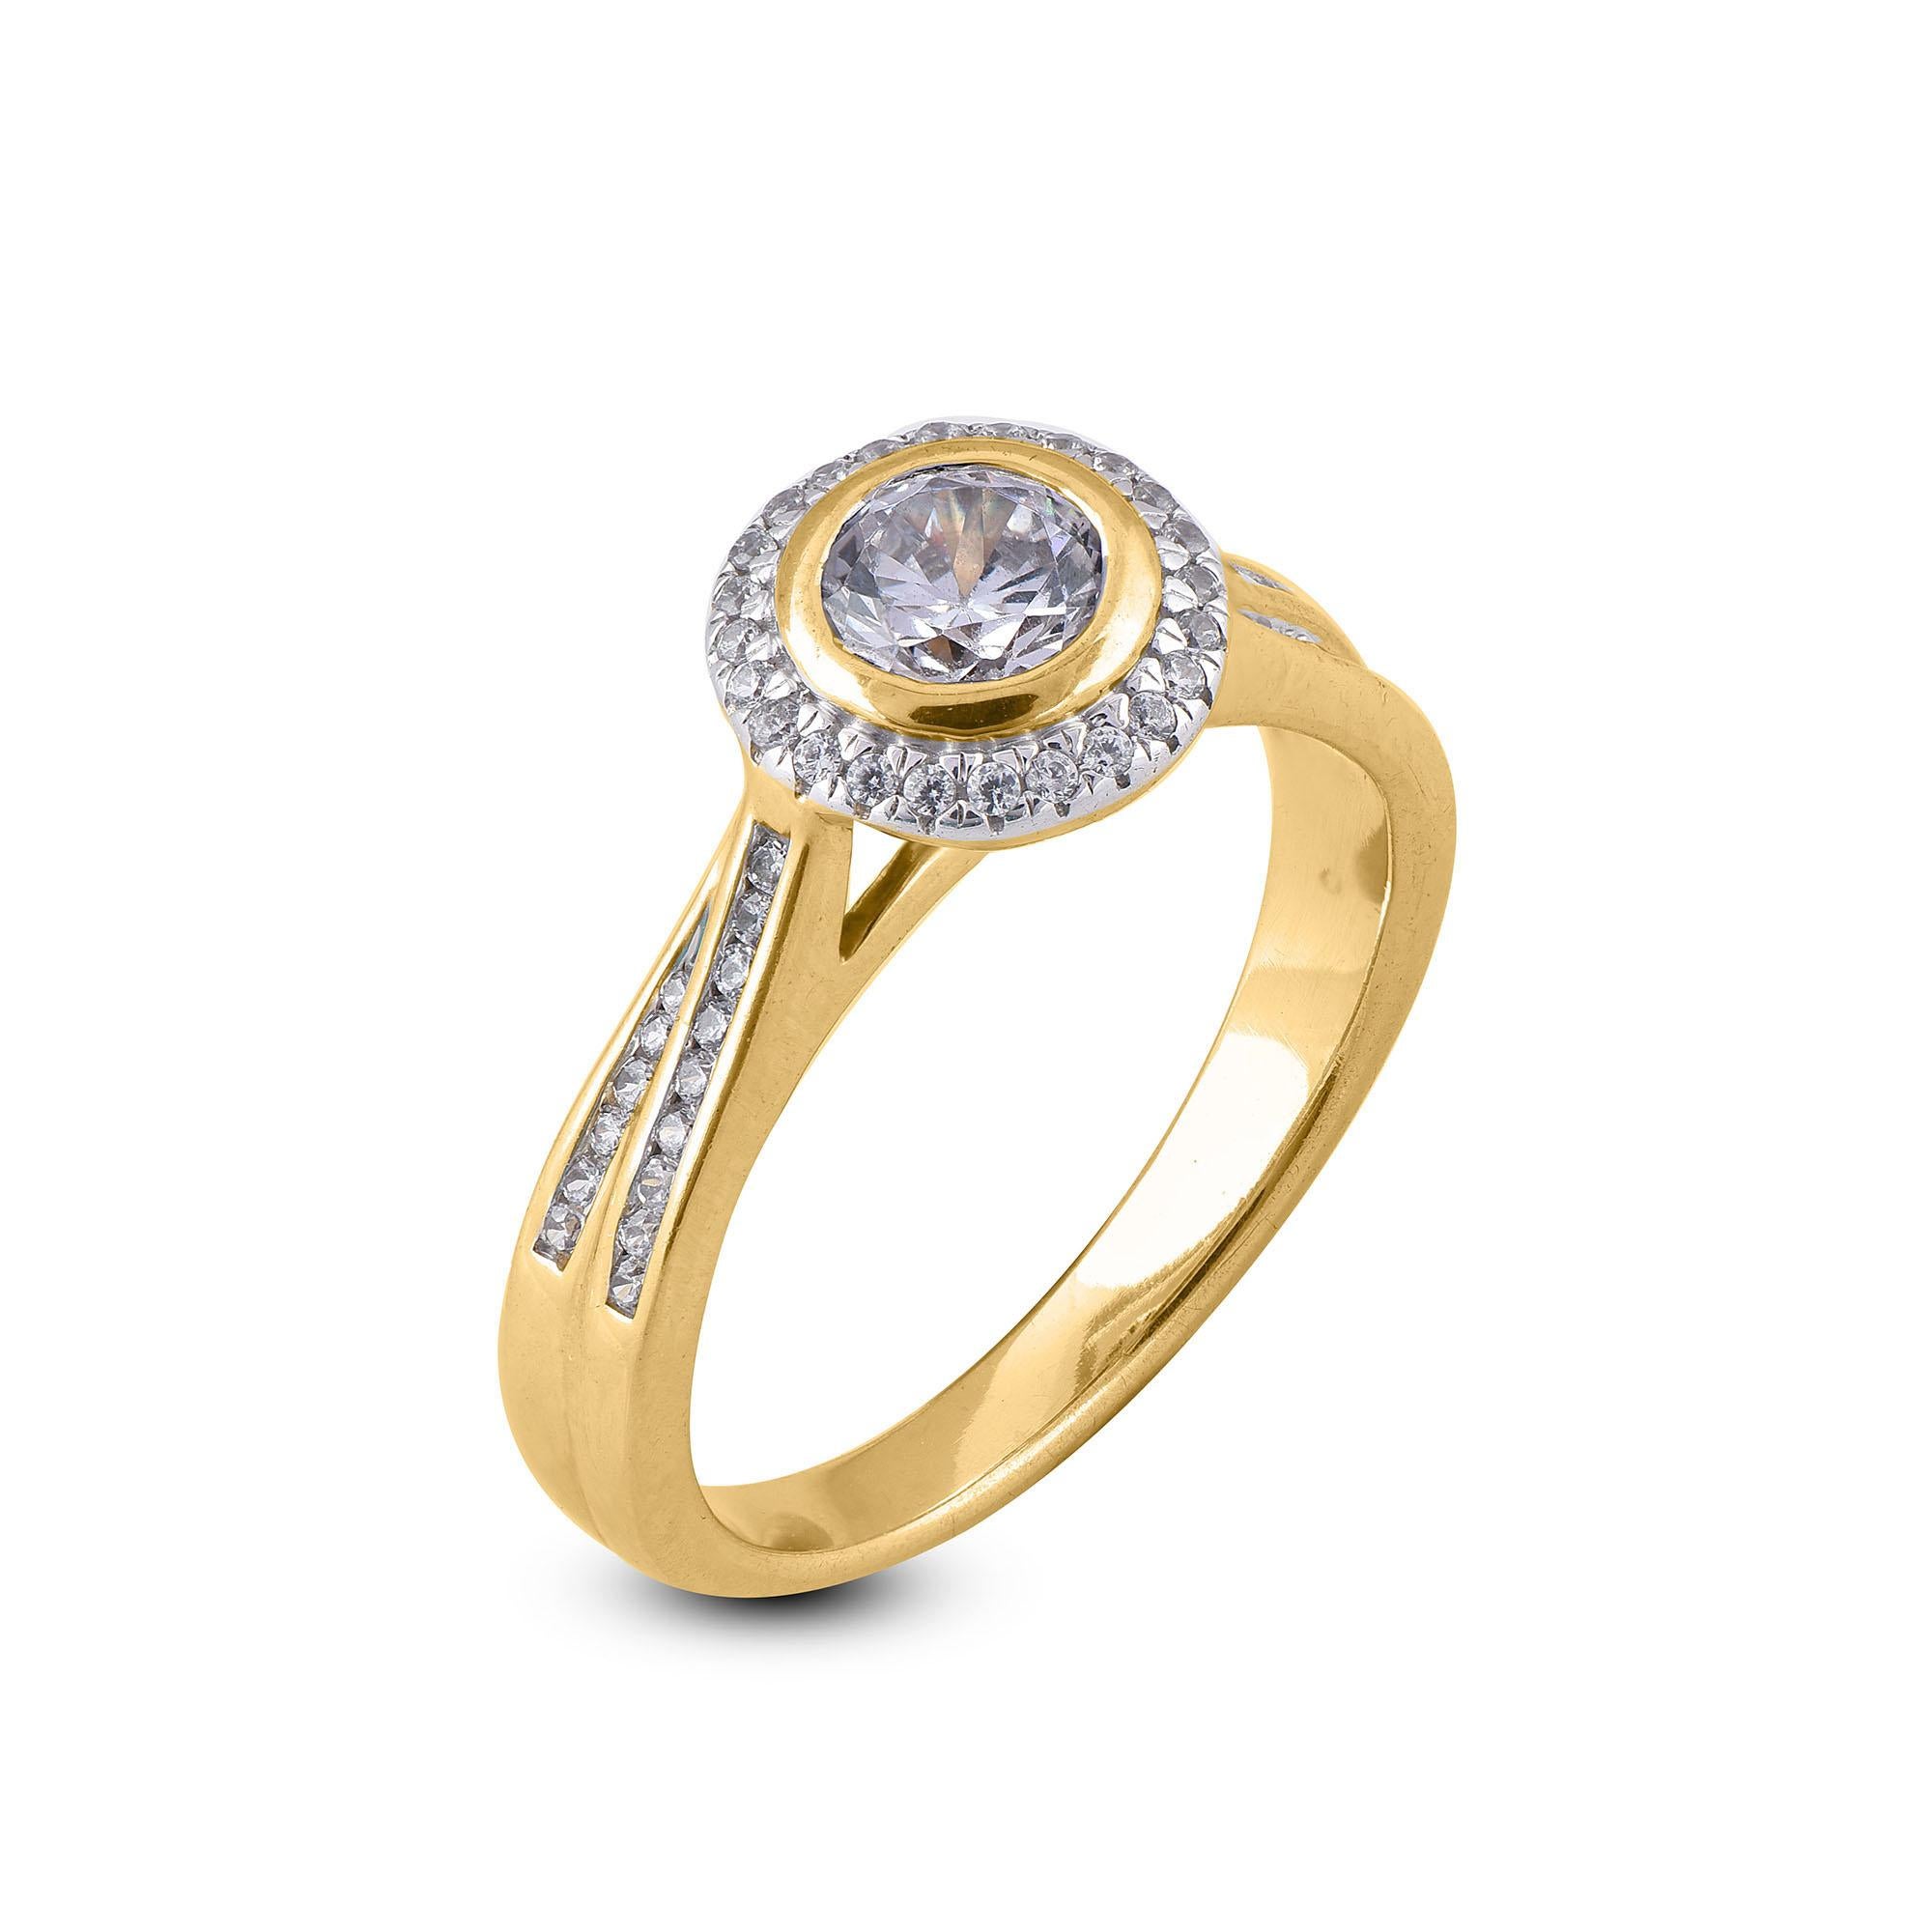 Exquisite 18 Karat Yellow gold ring featuring white diamonds. This ring is superbly detailed to perfection and set with 57 round cut sparkling diamond and set in secured prong, Bezel and channel setting.  The diamonds are natural, not-treated and